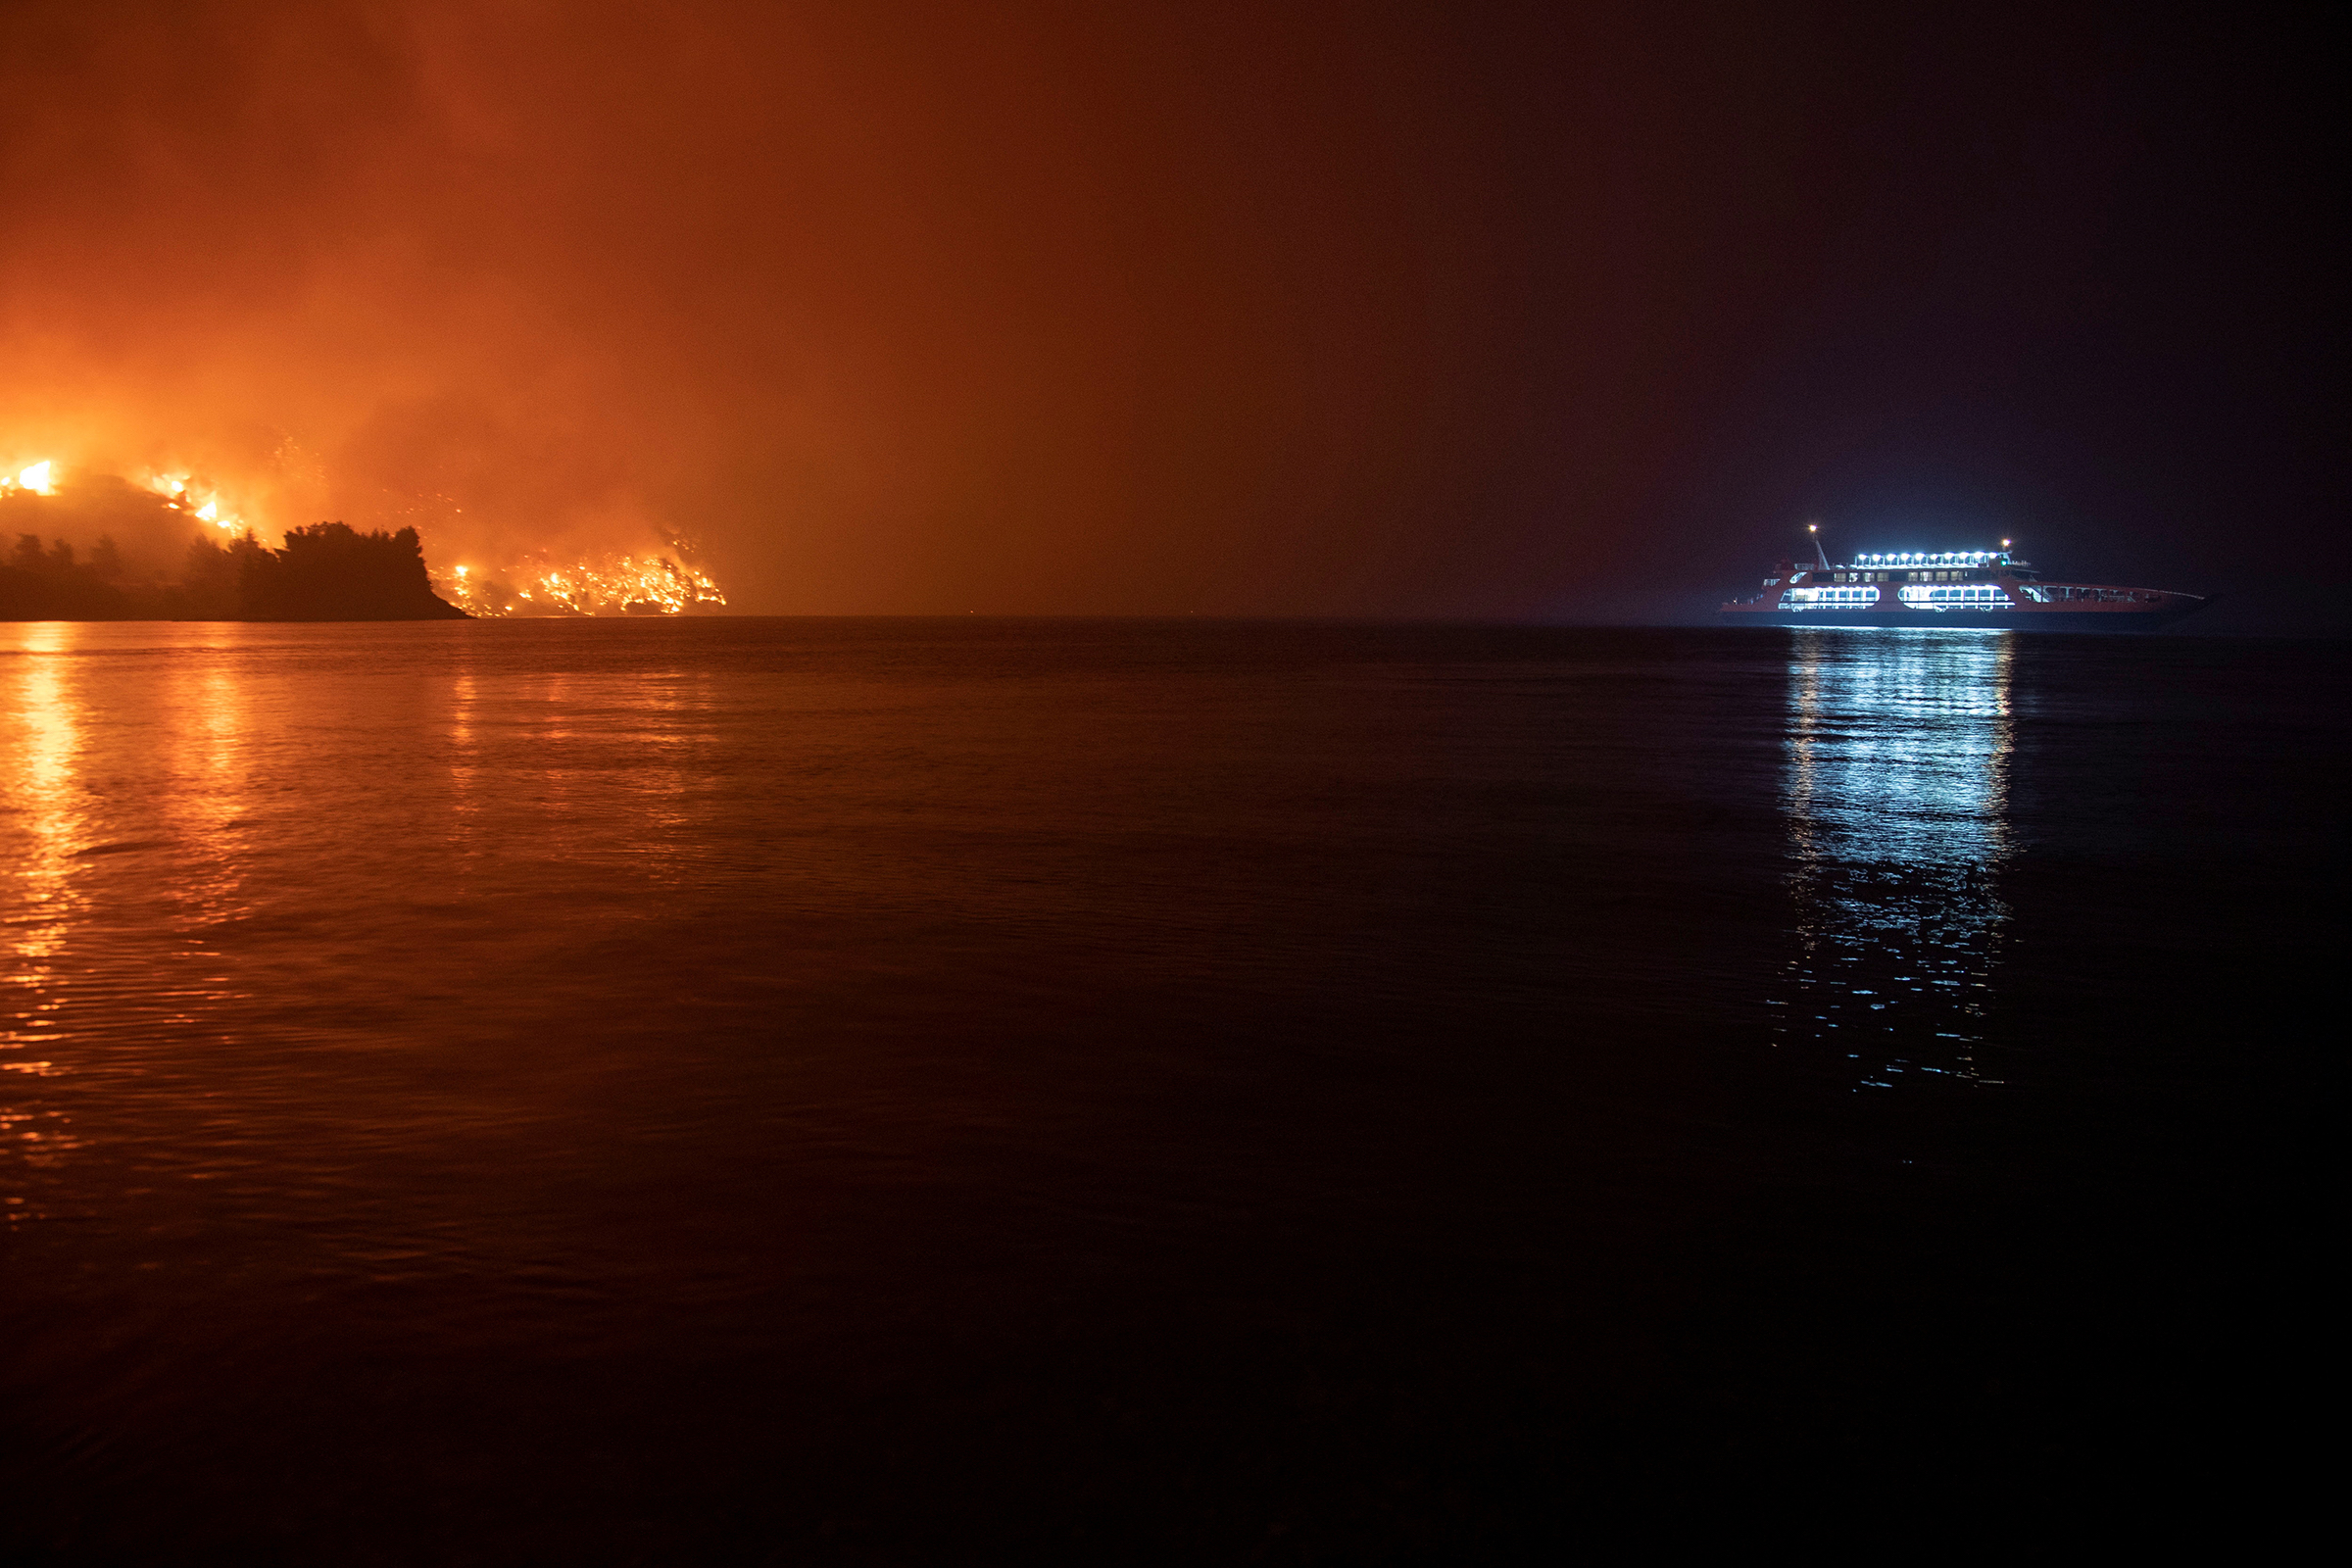 People are evacuated on a ferry as a wildfire burns in the Greek village of Limni, on the island of Evia, on Aug. 6. With other escape routes blocked by flames, residents and tourists were urged to flee by boat. (Nicolas Economou—Reuters)